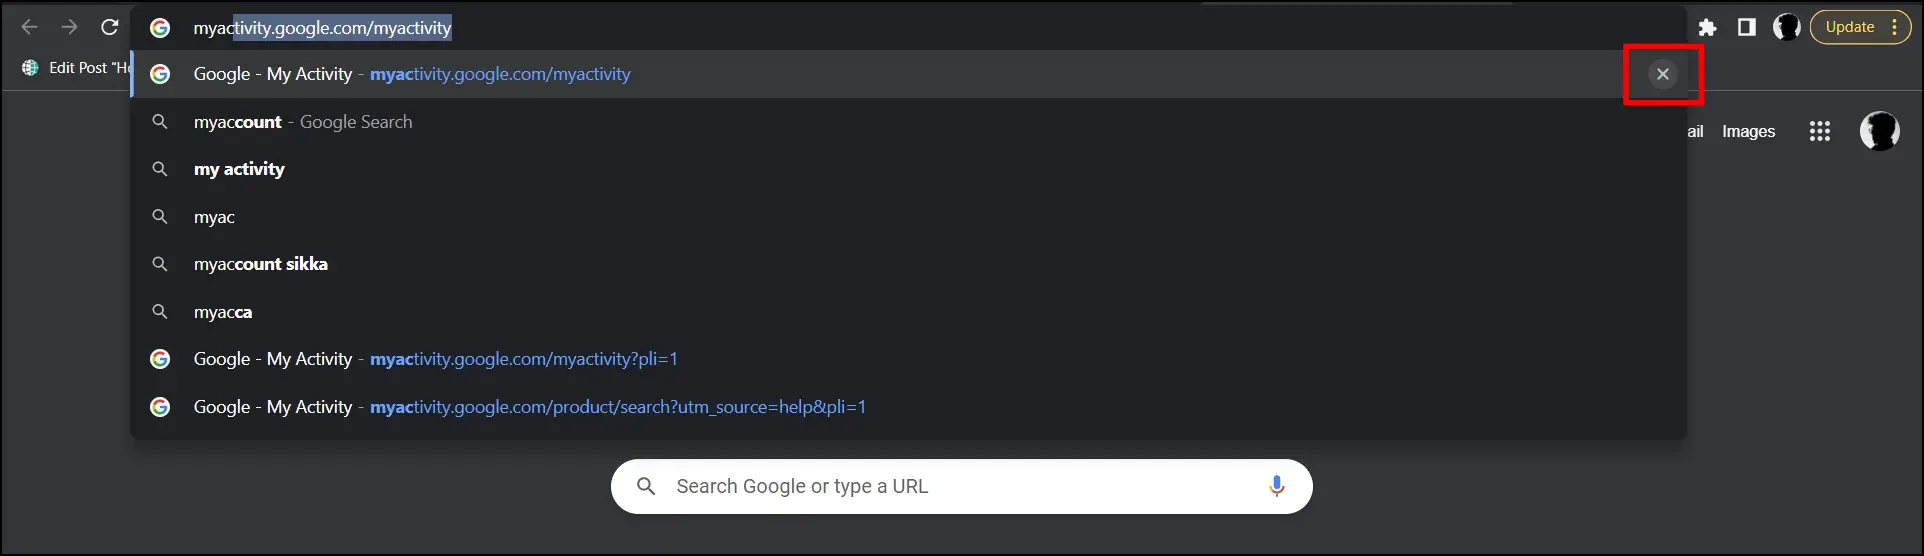 Delete the Google Search Bar Suggestions Manually